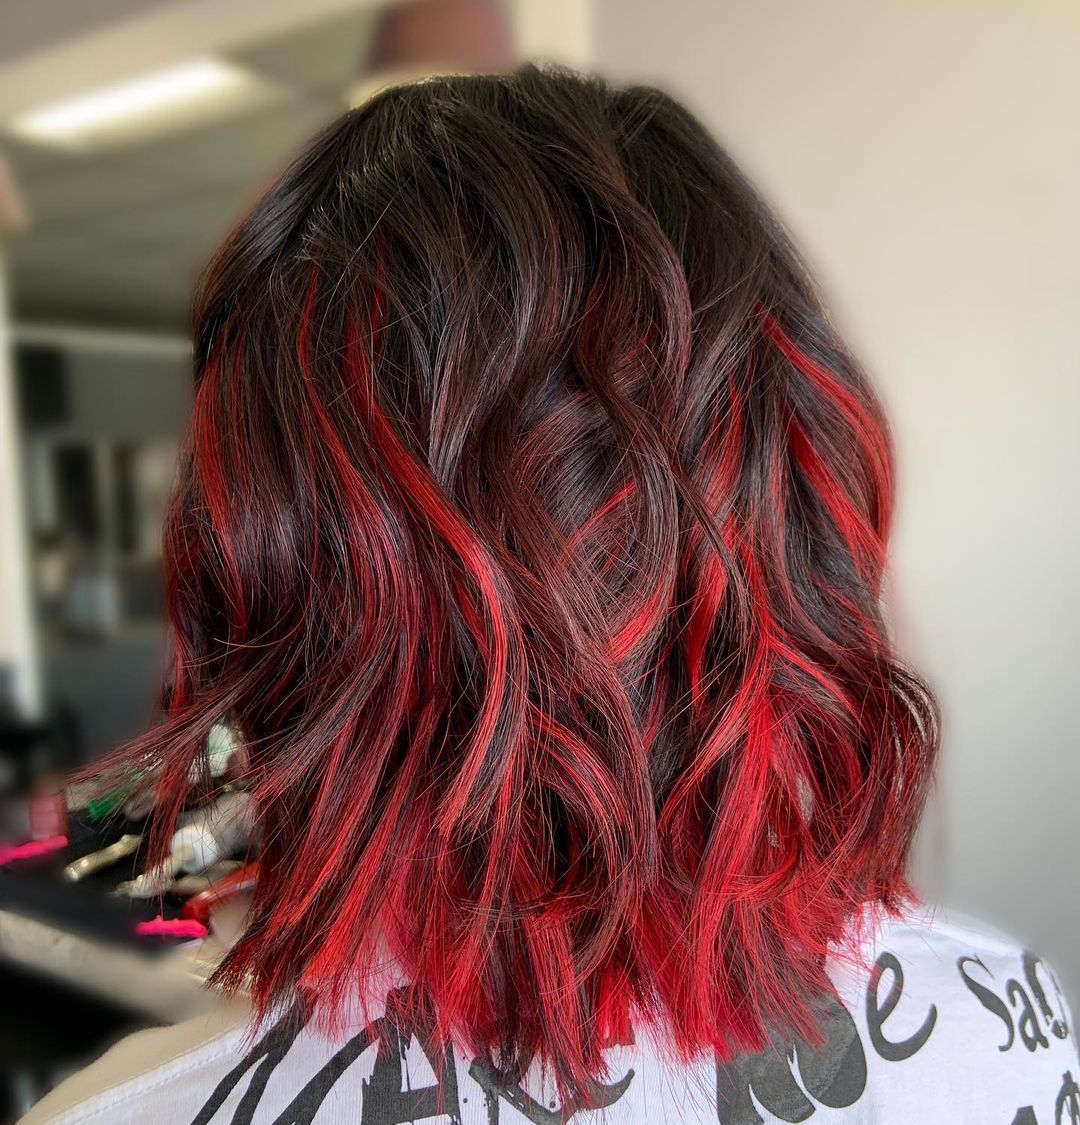 Untitled Black Hair With Fantasy Red Highlights And Half